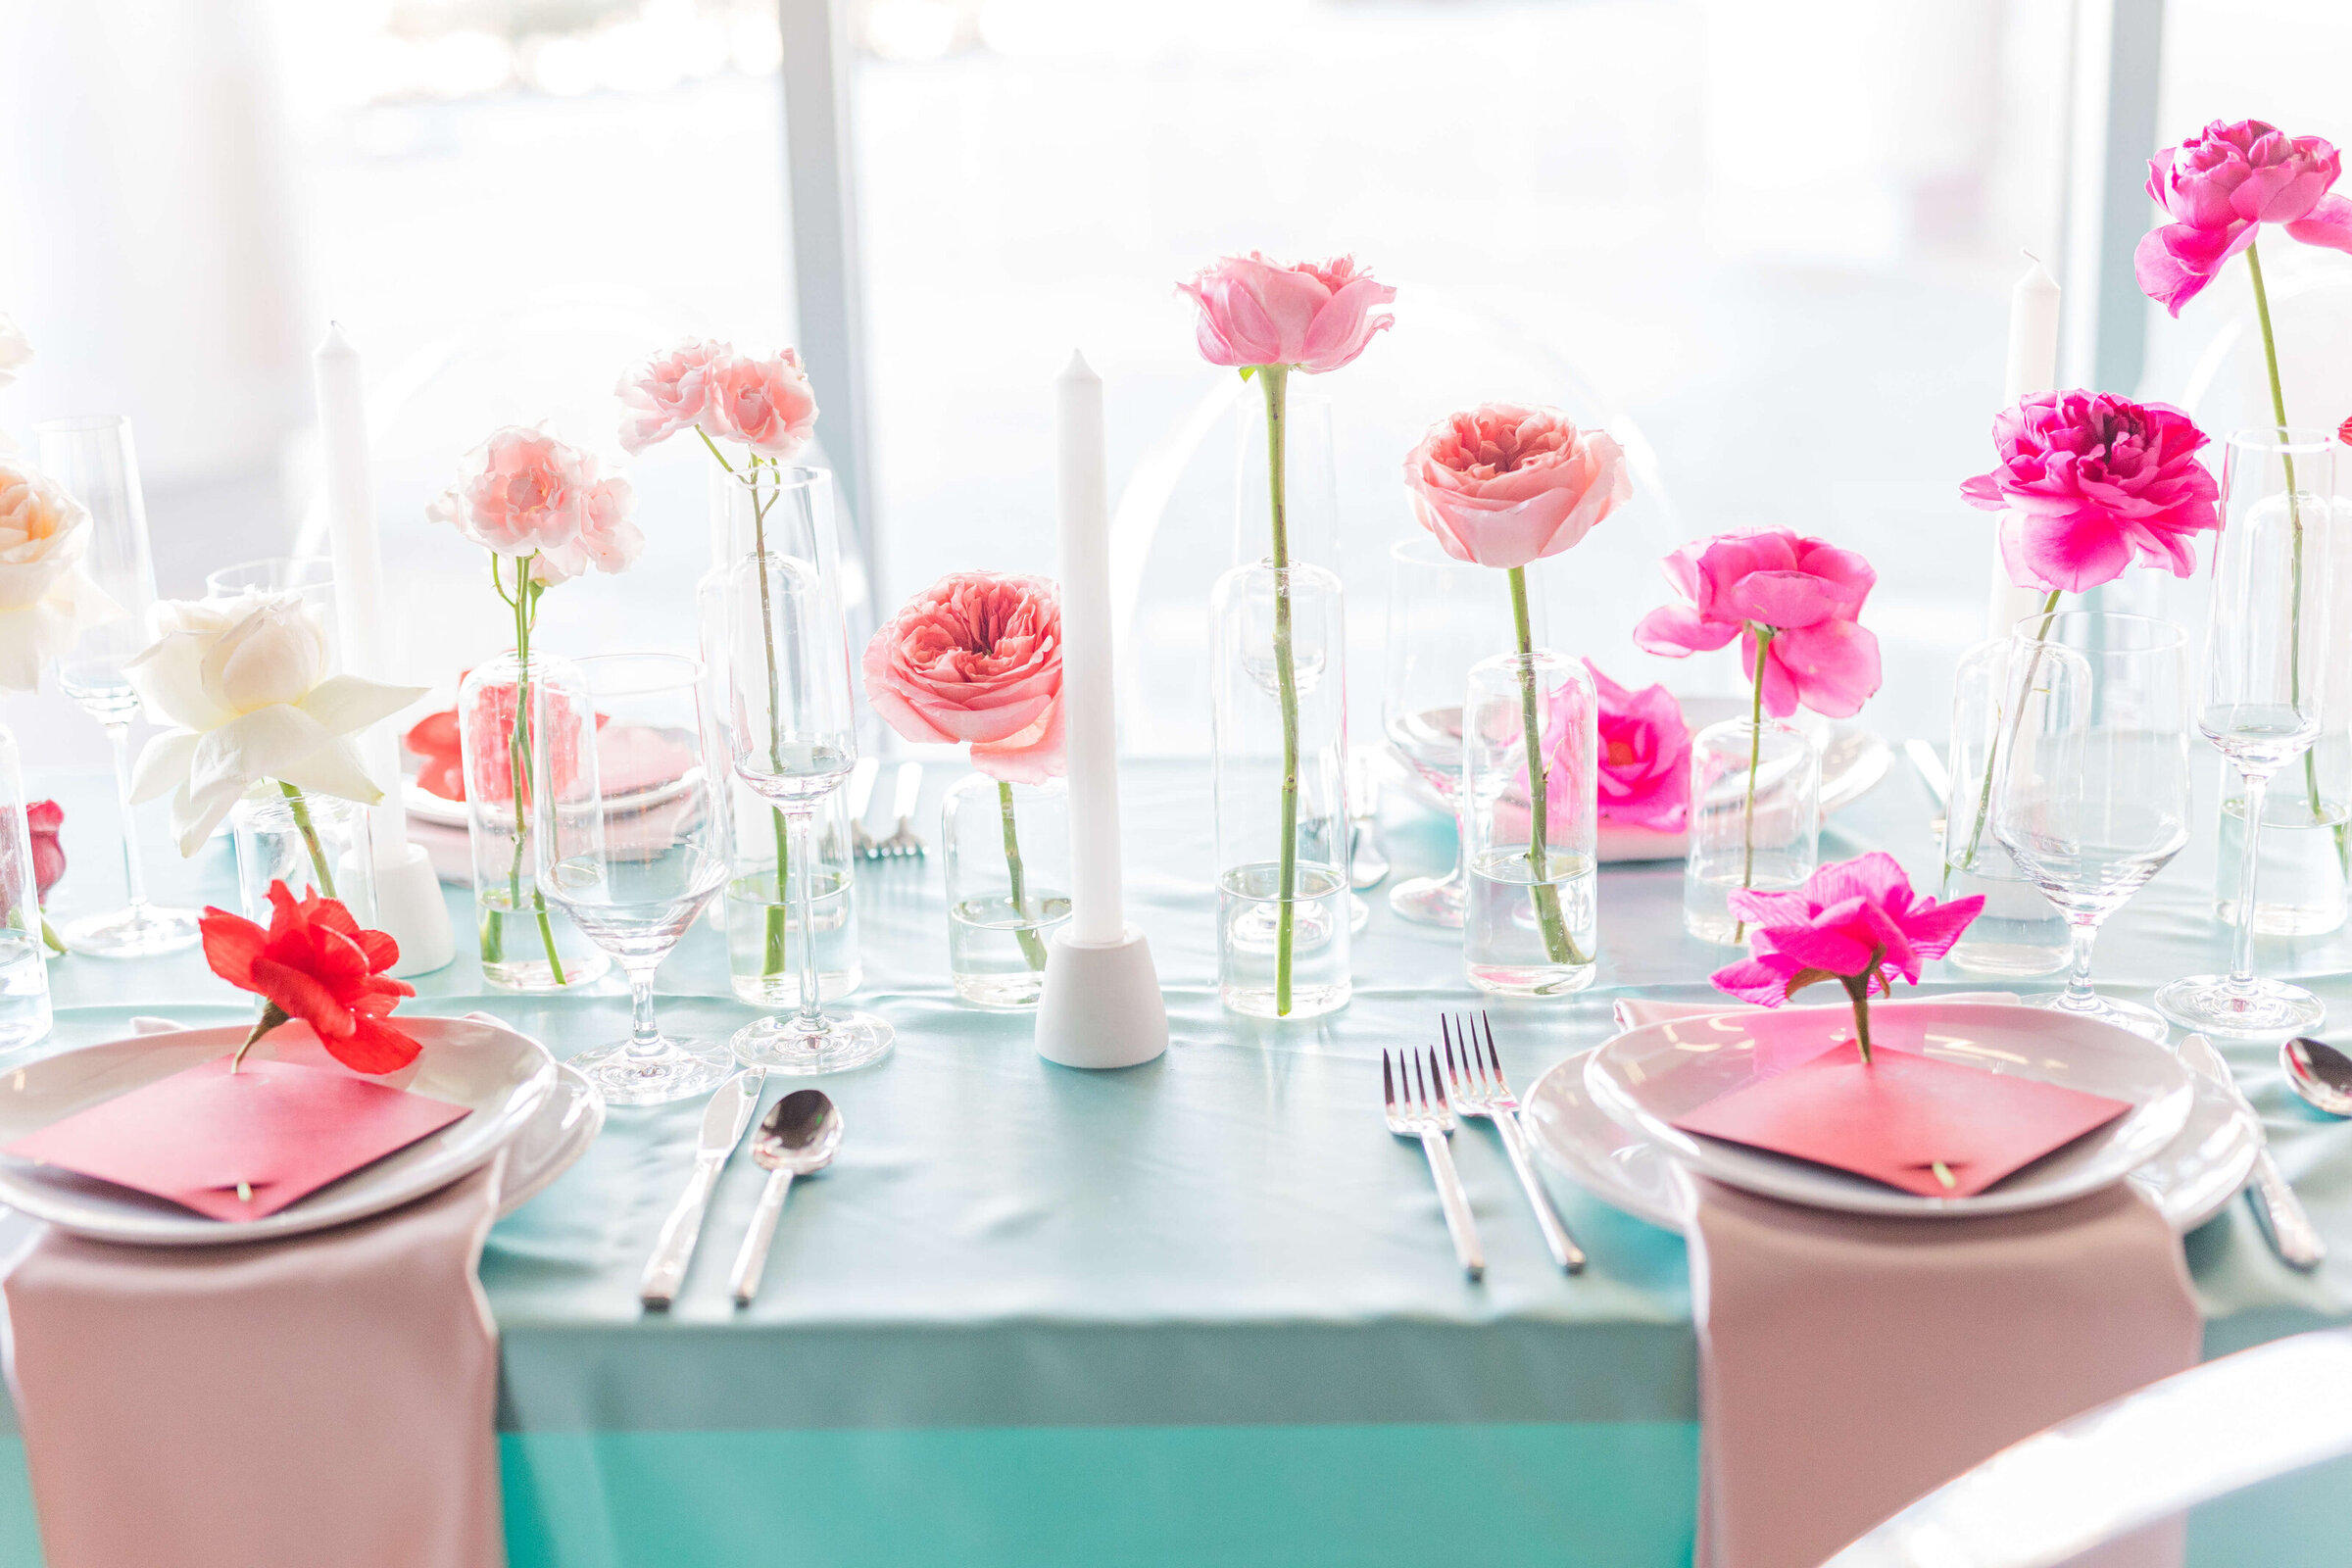 A table with a teal tablecloth, plates, pink napkins, and roses all in individual vases